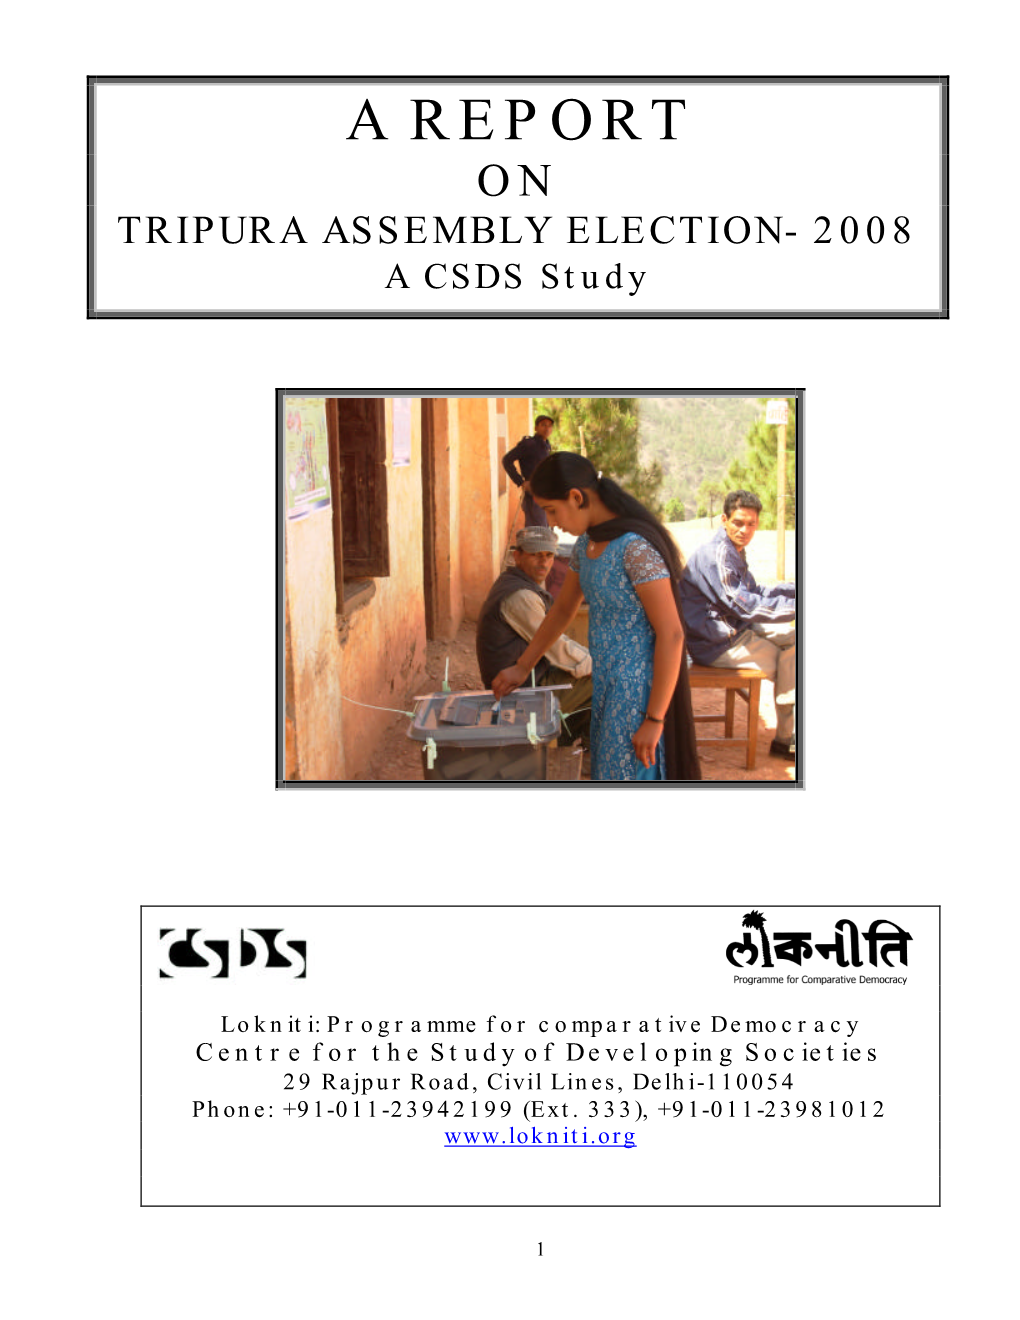 A REPORT on TRIPURA ASSEMBLY ELECTION- 2008 a CSDS Study